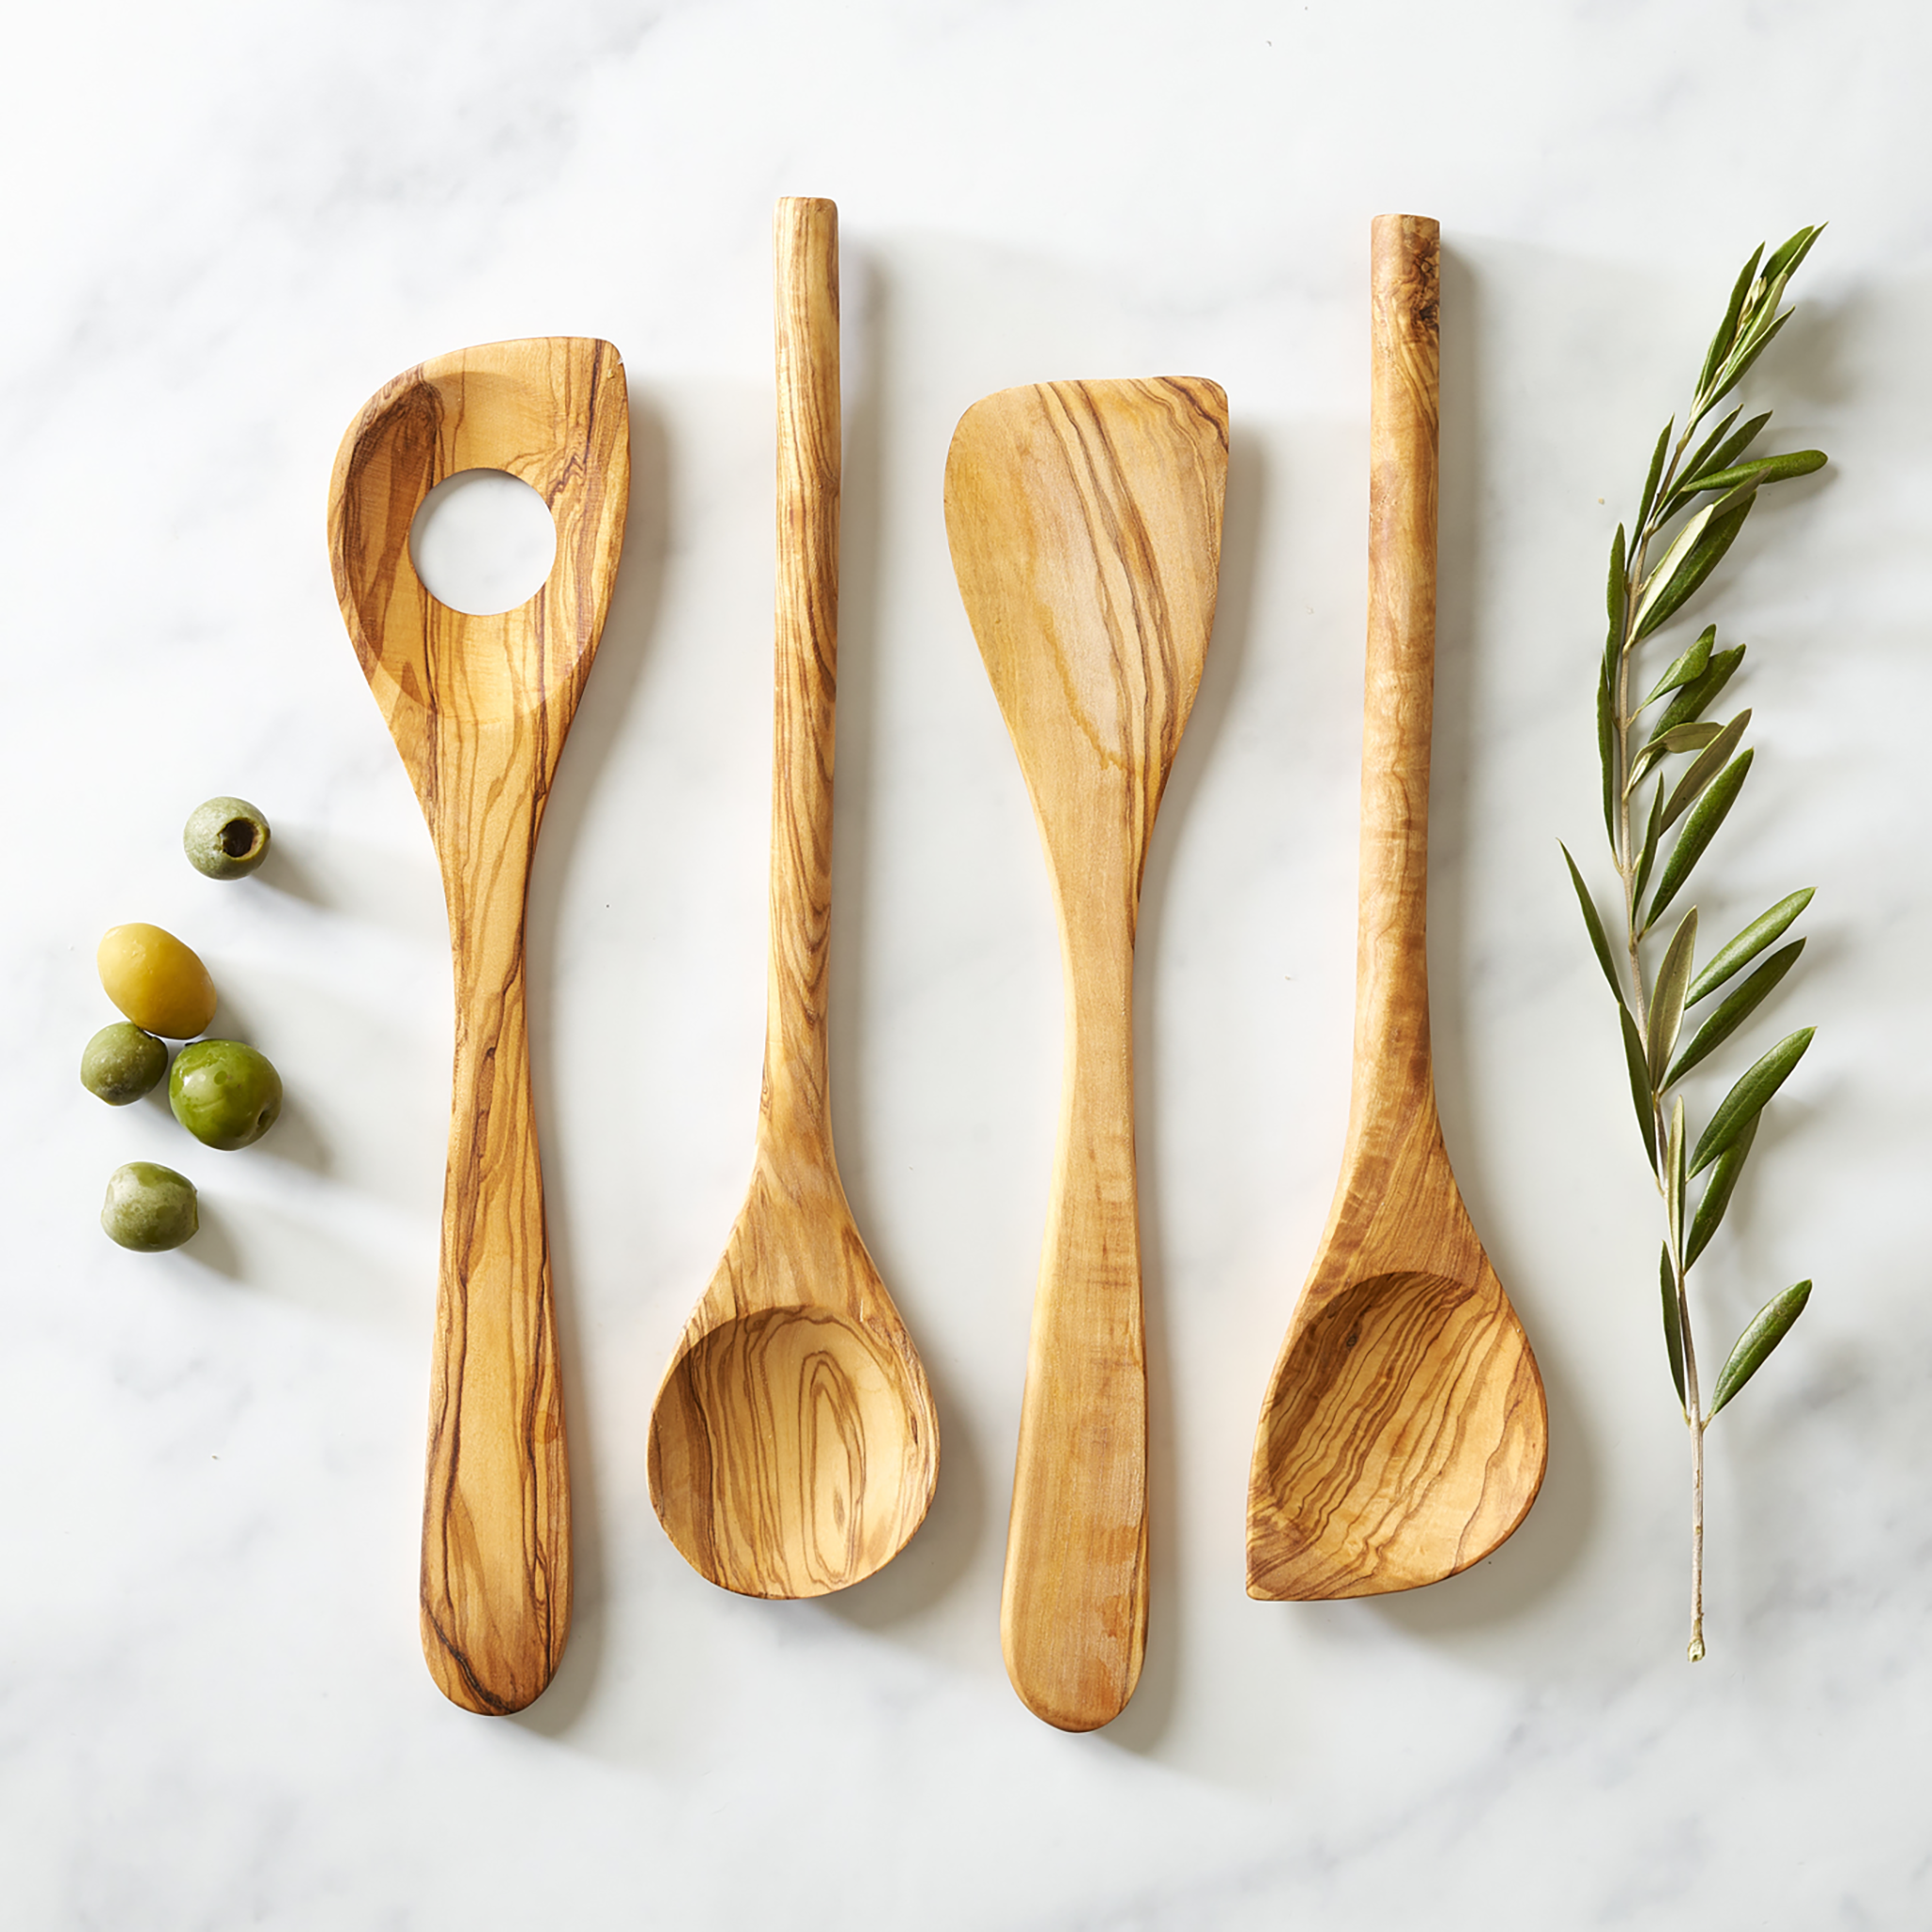 https://cdn.shopify.com/s/files/1/0297/3859/8533/products/olive_wood_spoons.png?v=1680194179